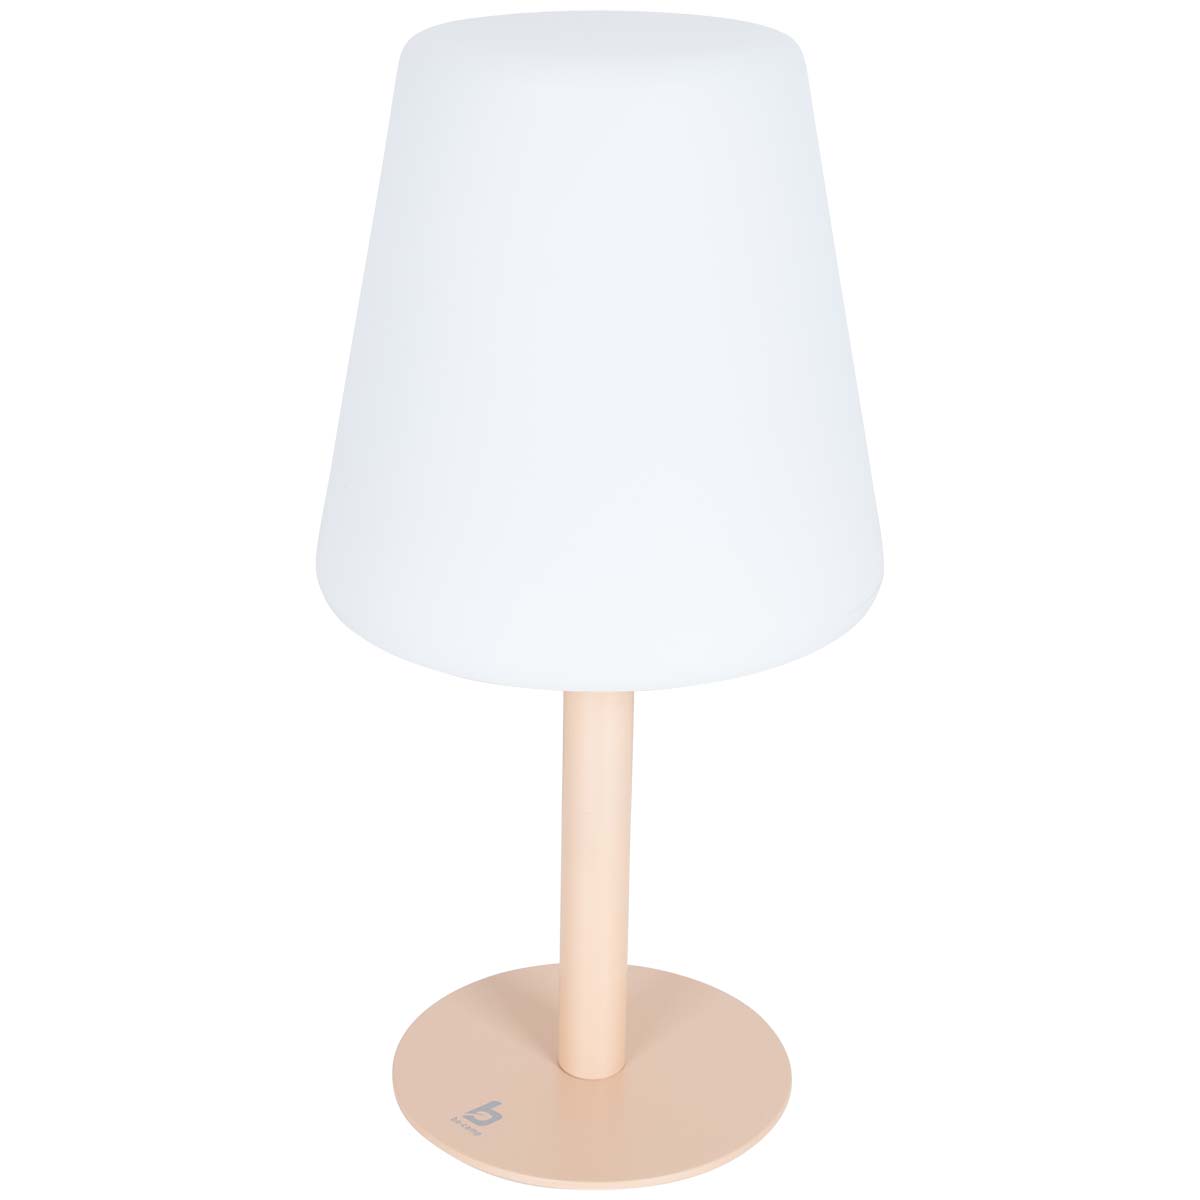 5818625 An atmospheric and colorful rechargeable table lamp from the pastel collection. Gives a pleasant light by the warm white LED lighting. Equipped with 3 light modes (25%/50%/100%), a plastic housing and pink steel base. The built-in Li-ion battery can be charged with an included USB cable. Ideal for on a table or cabinet.